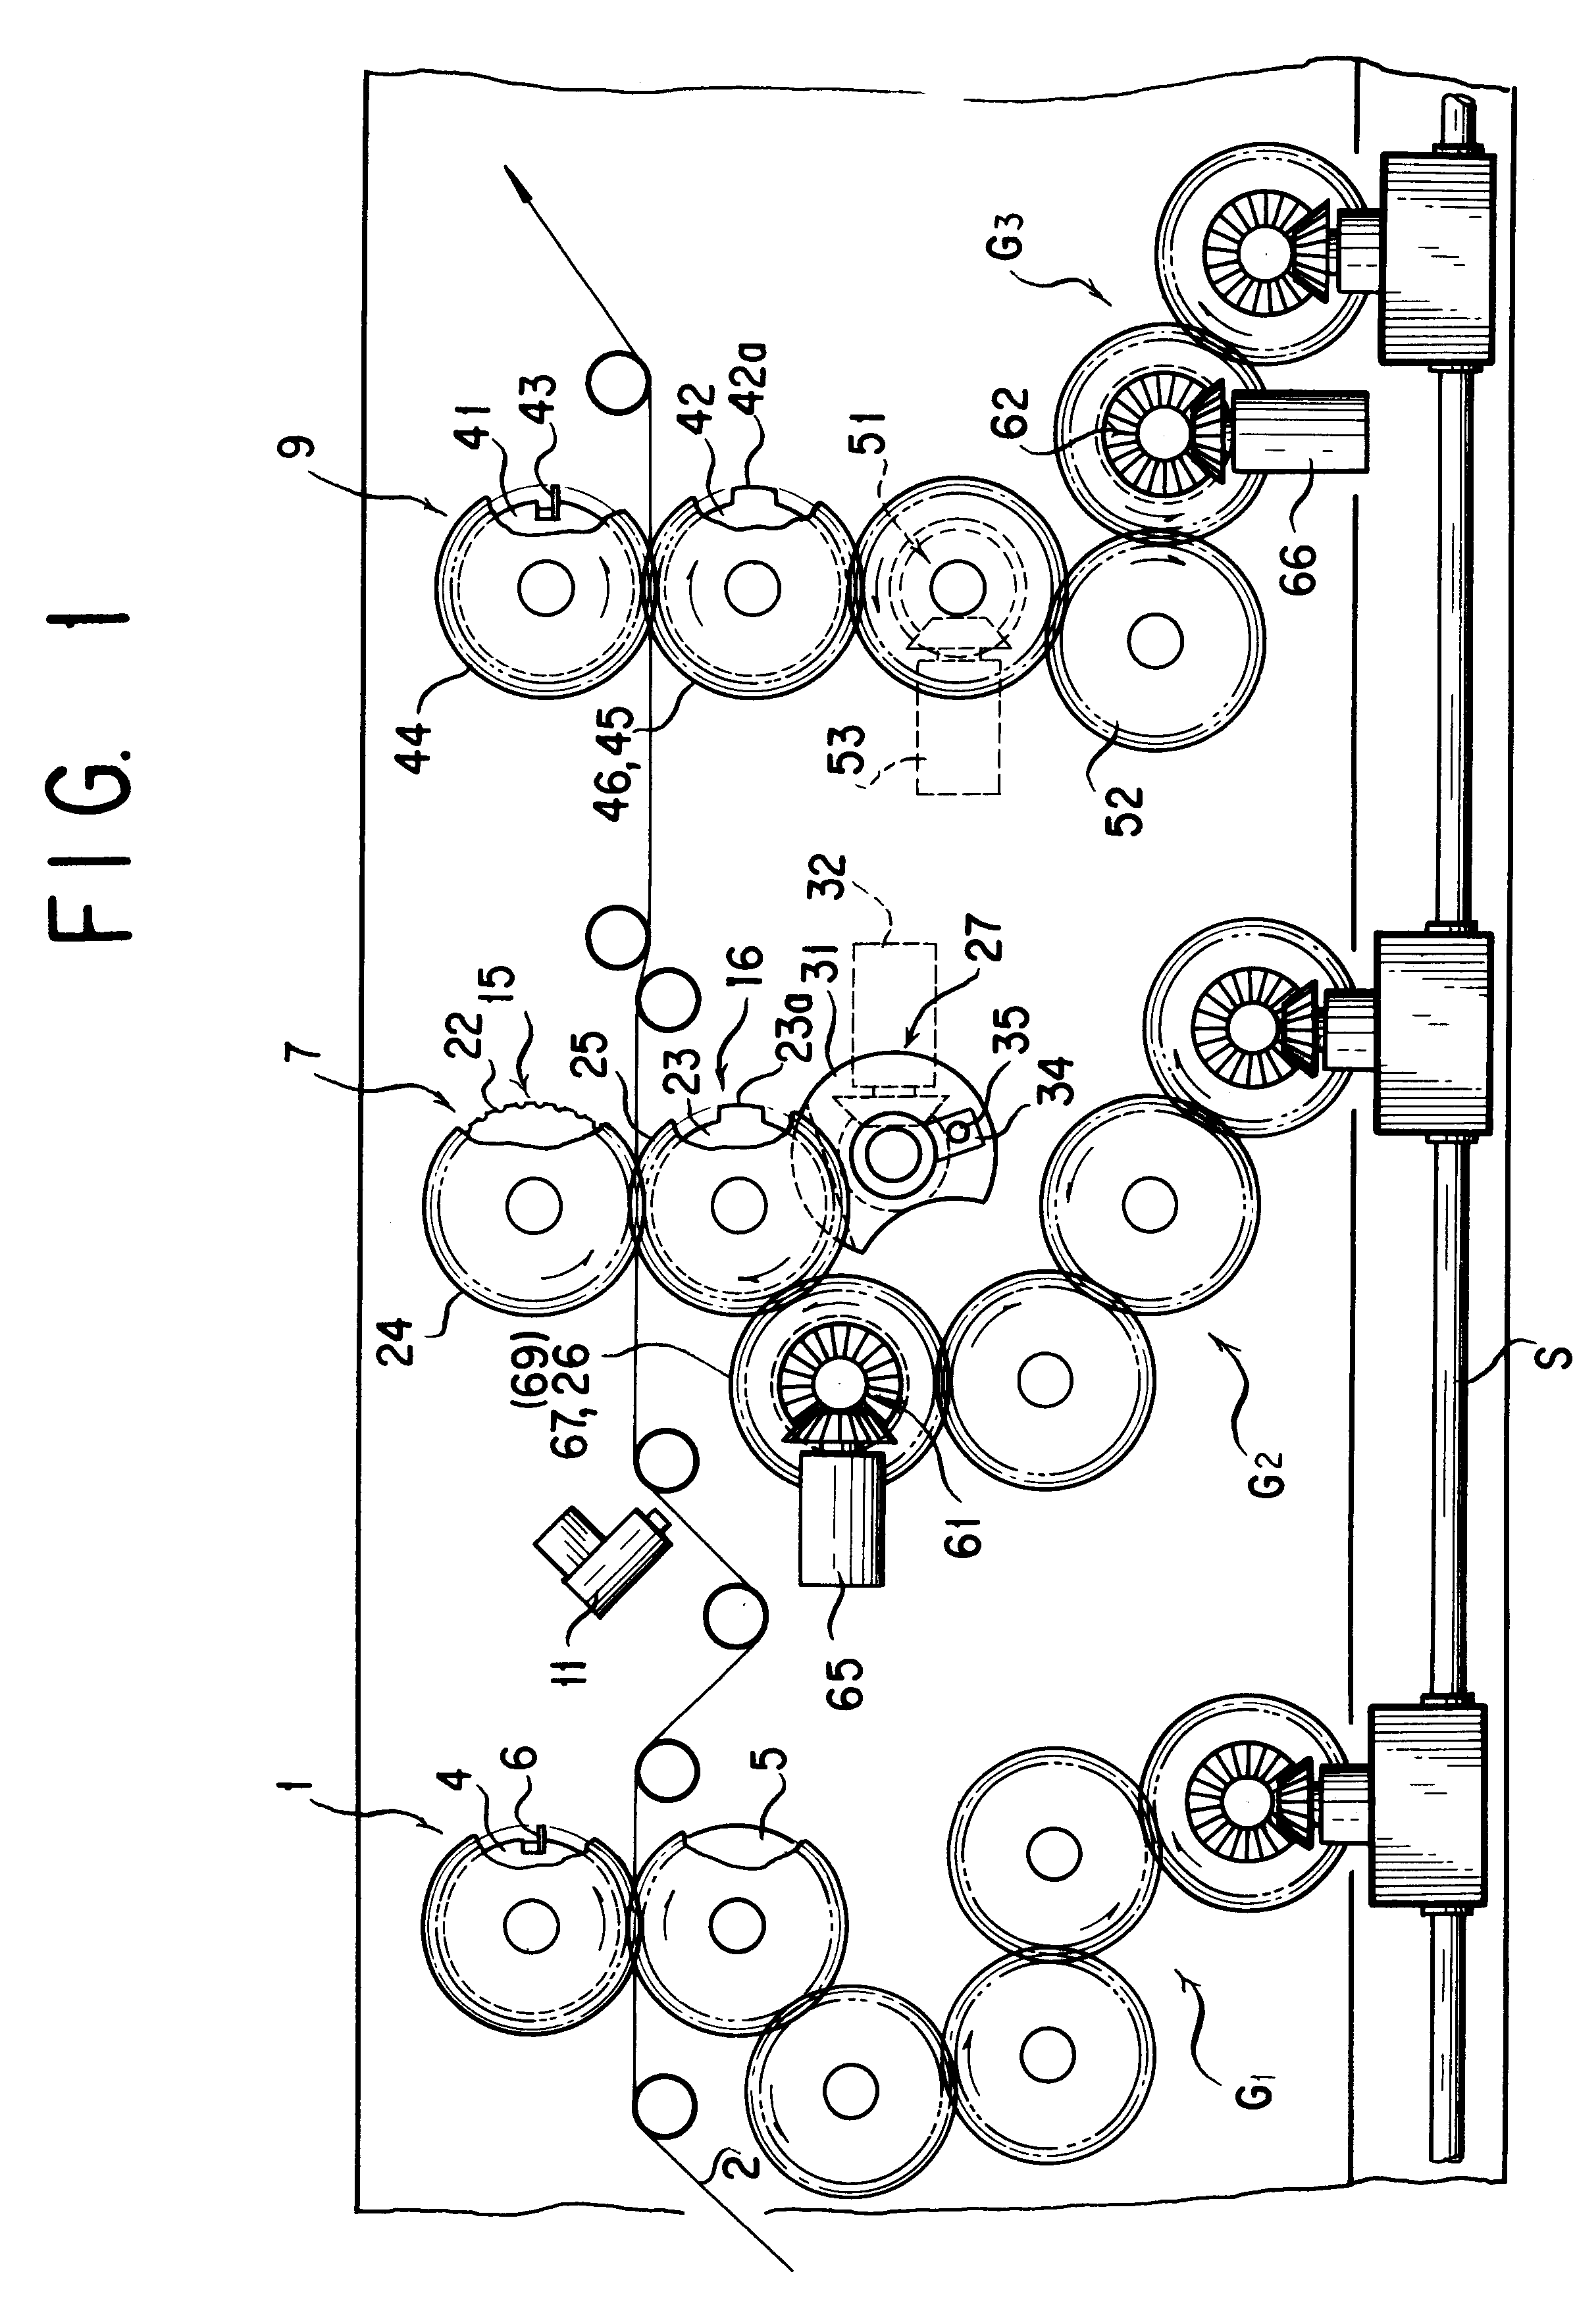 Arbitrarily positioned lateral perforation forming apparatus for form printing machine